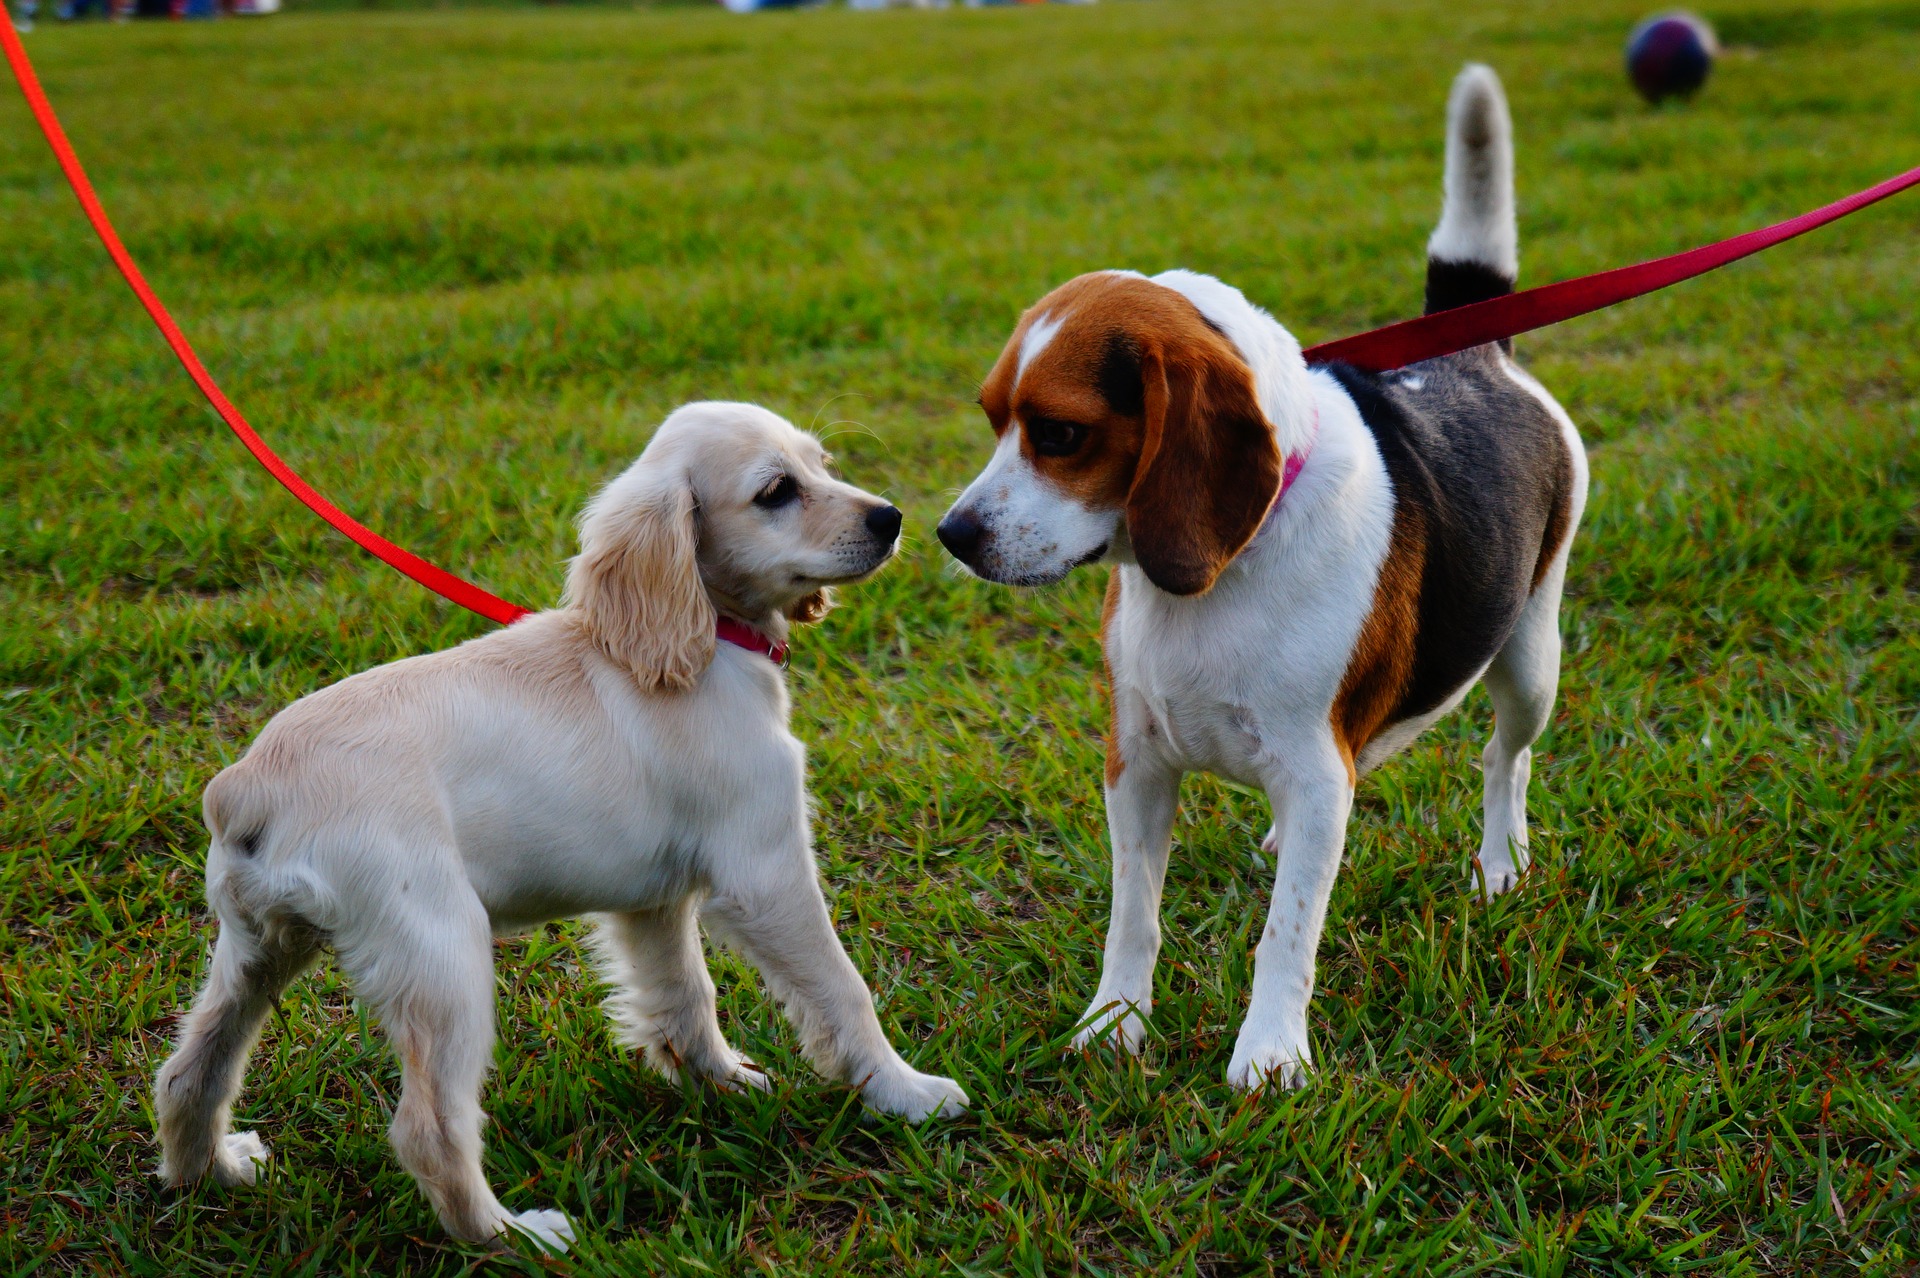 Two leashed dogs meeting at a dog park on green grass